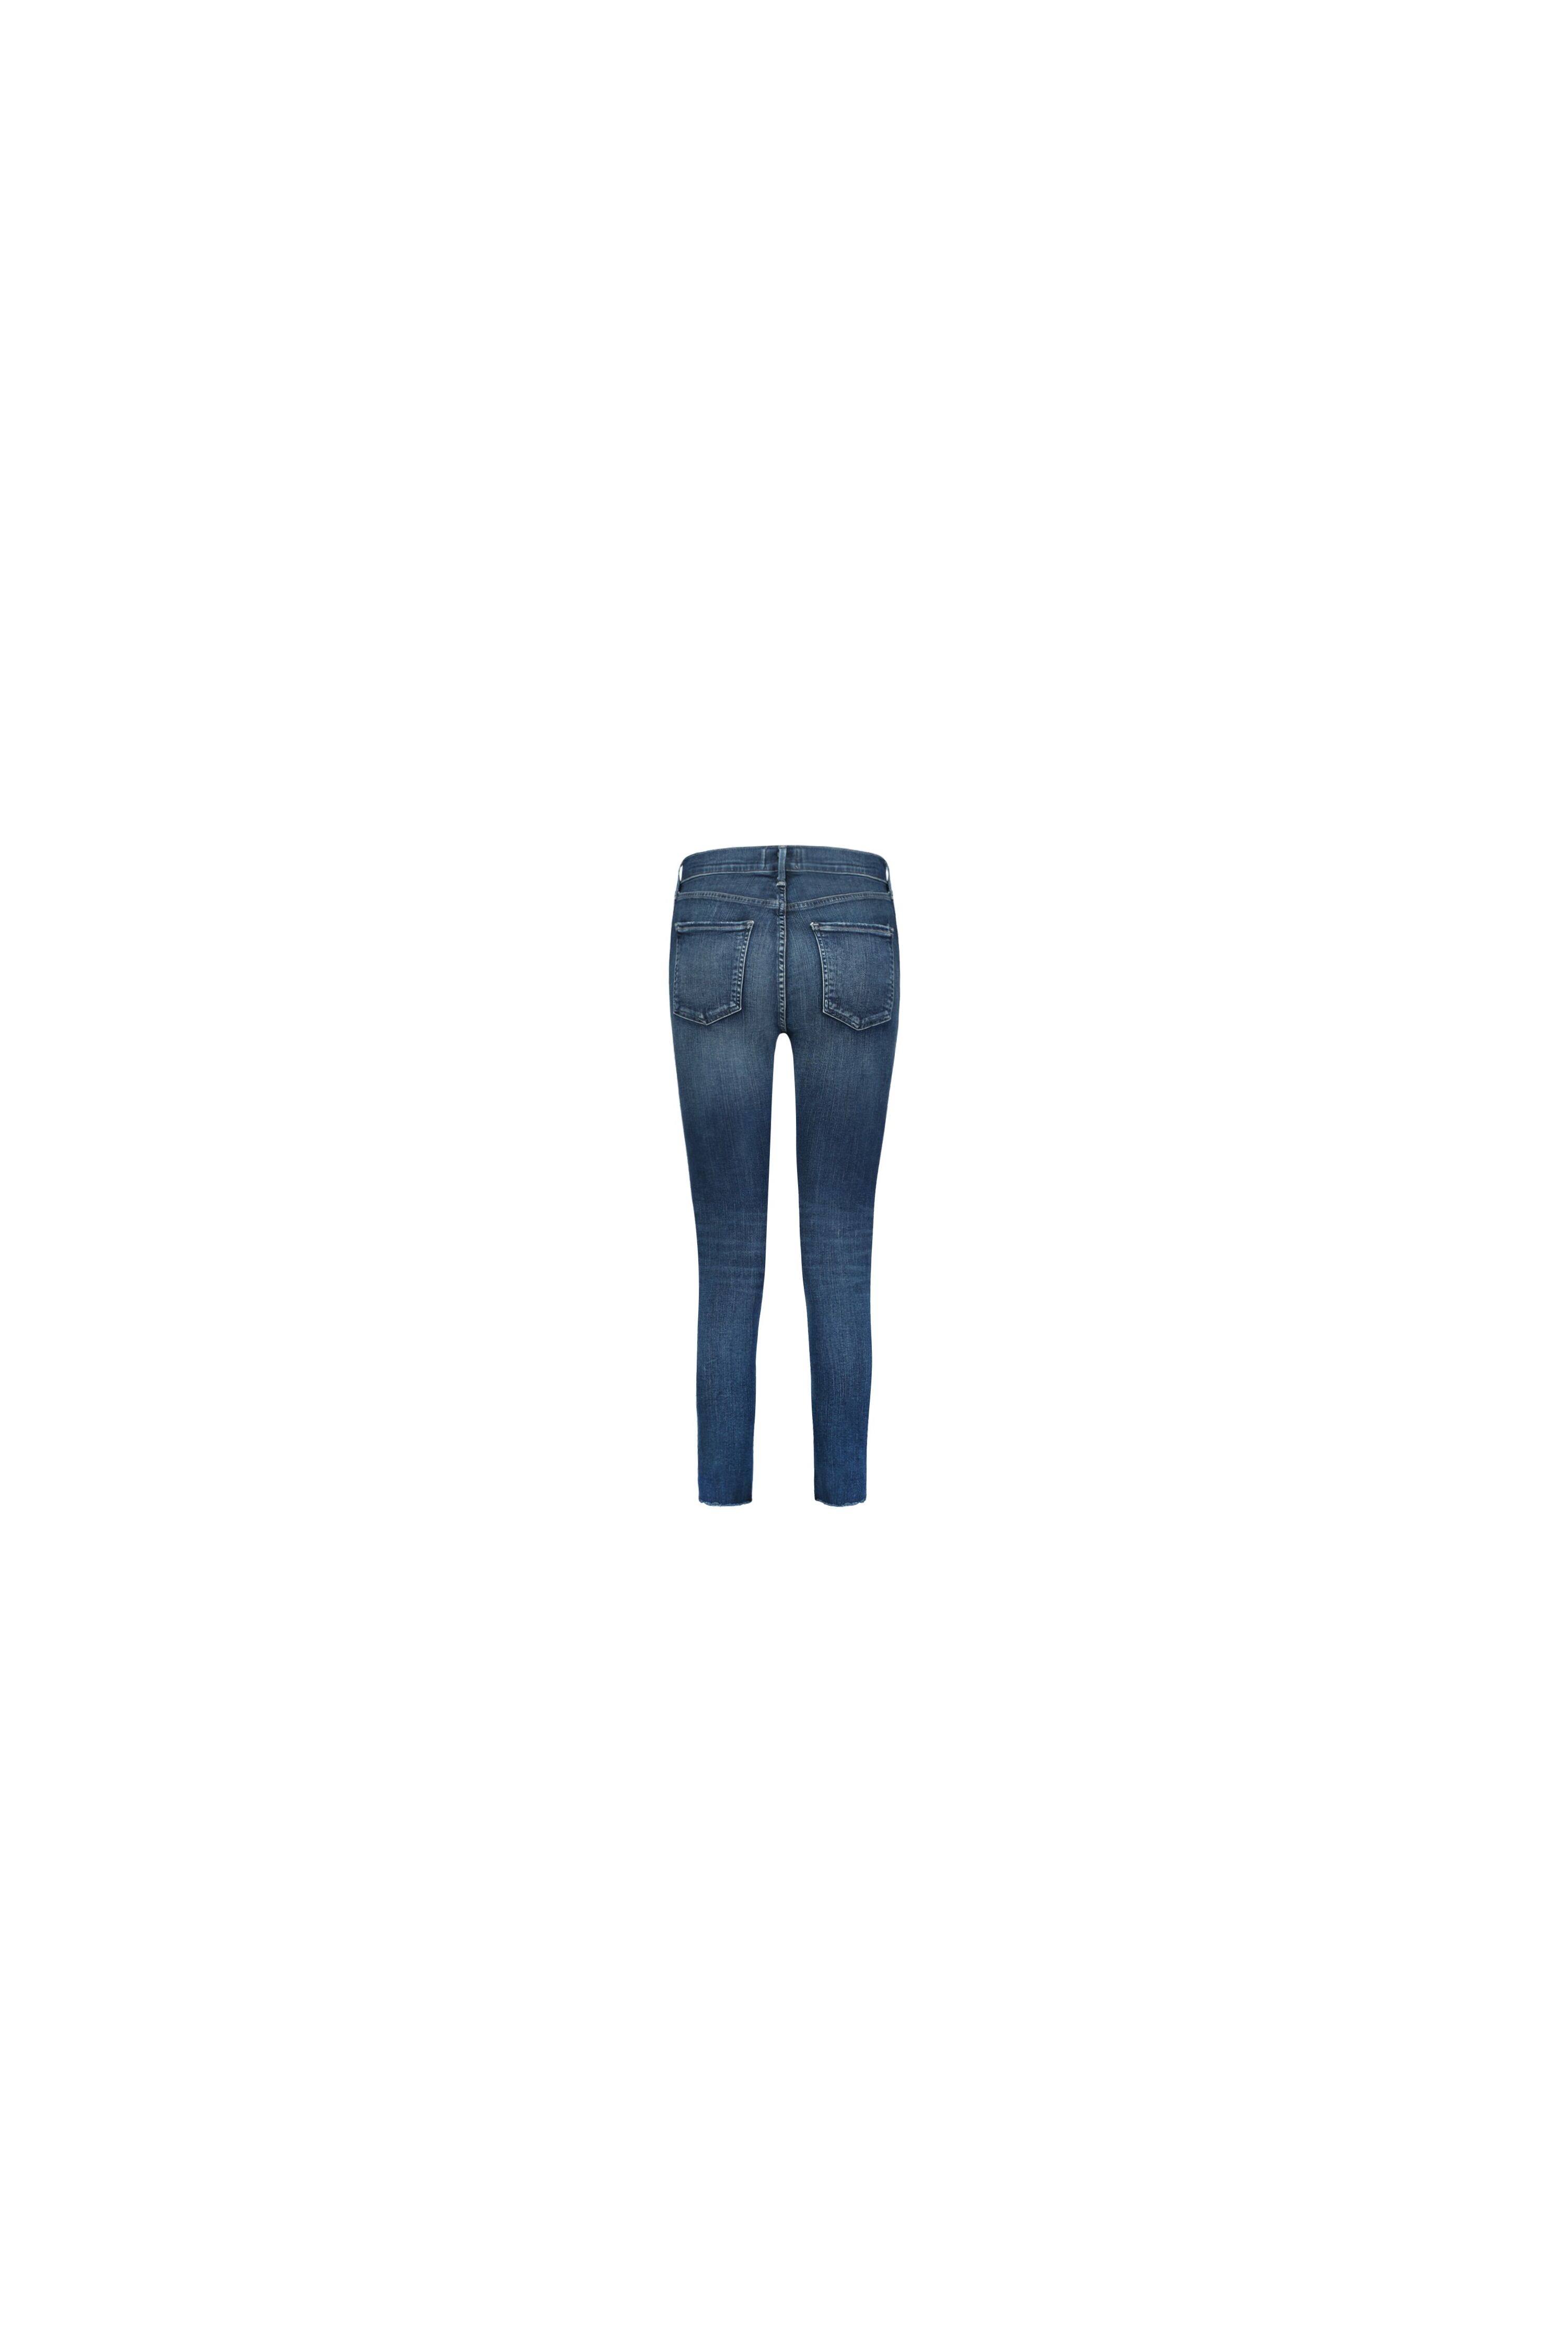 Agolde Jeans Sophie High Rise Skinny Crop Claremont - A018 2022 | Bloom